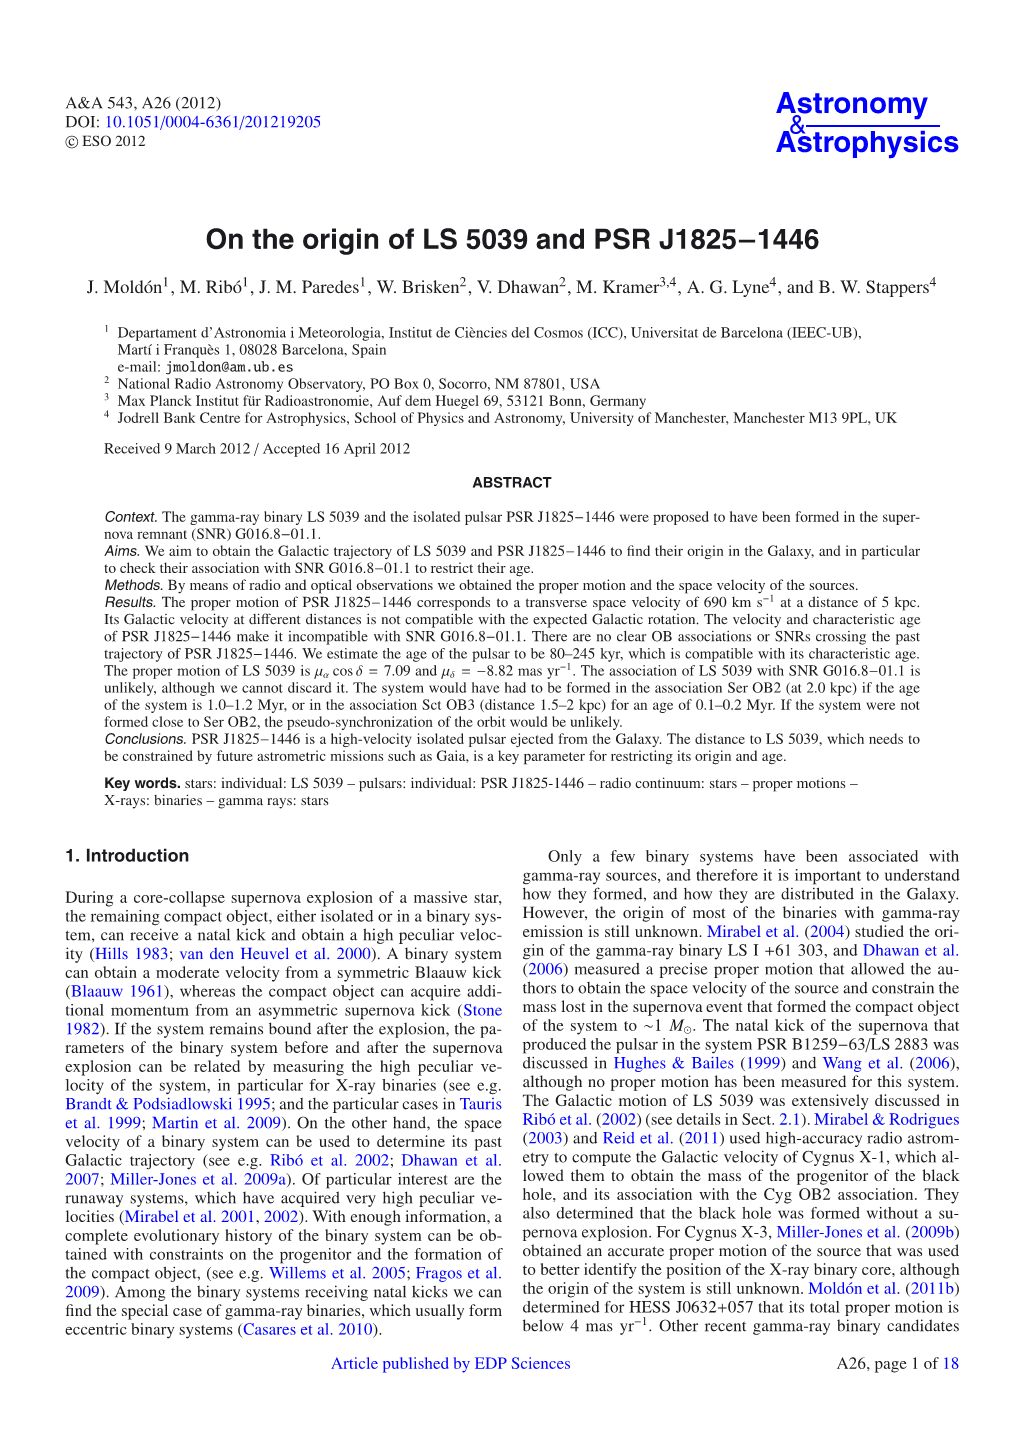 On the Origin of LS 5039 and PSR J1825−1446